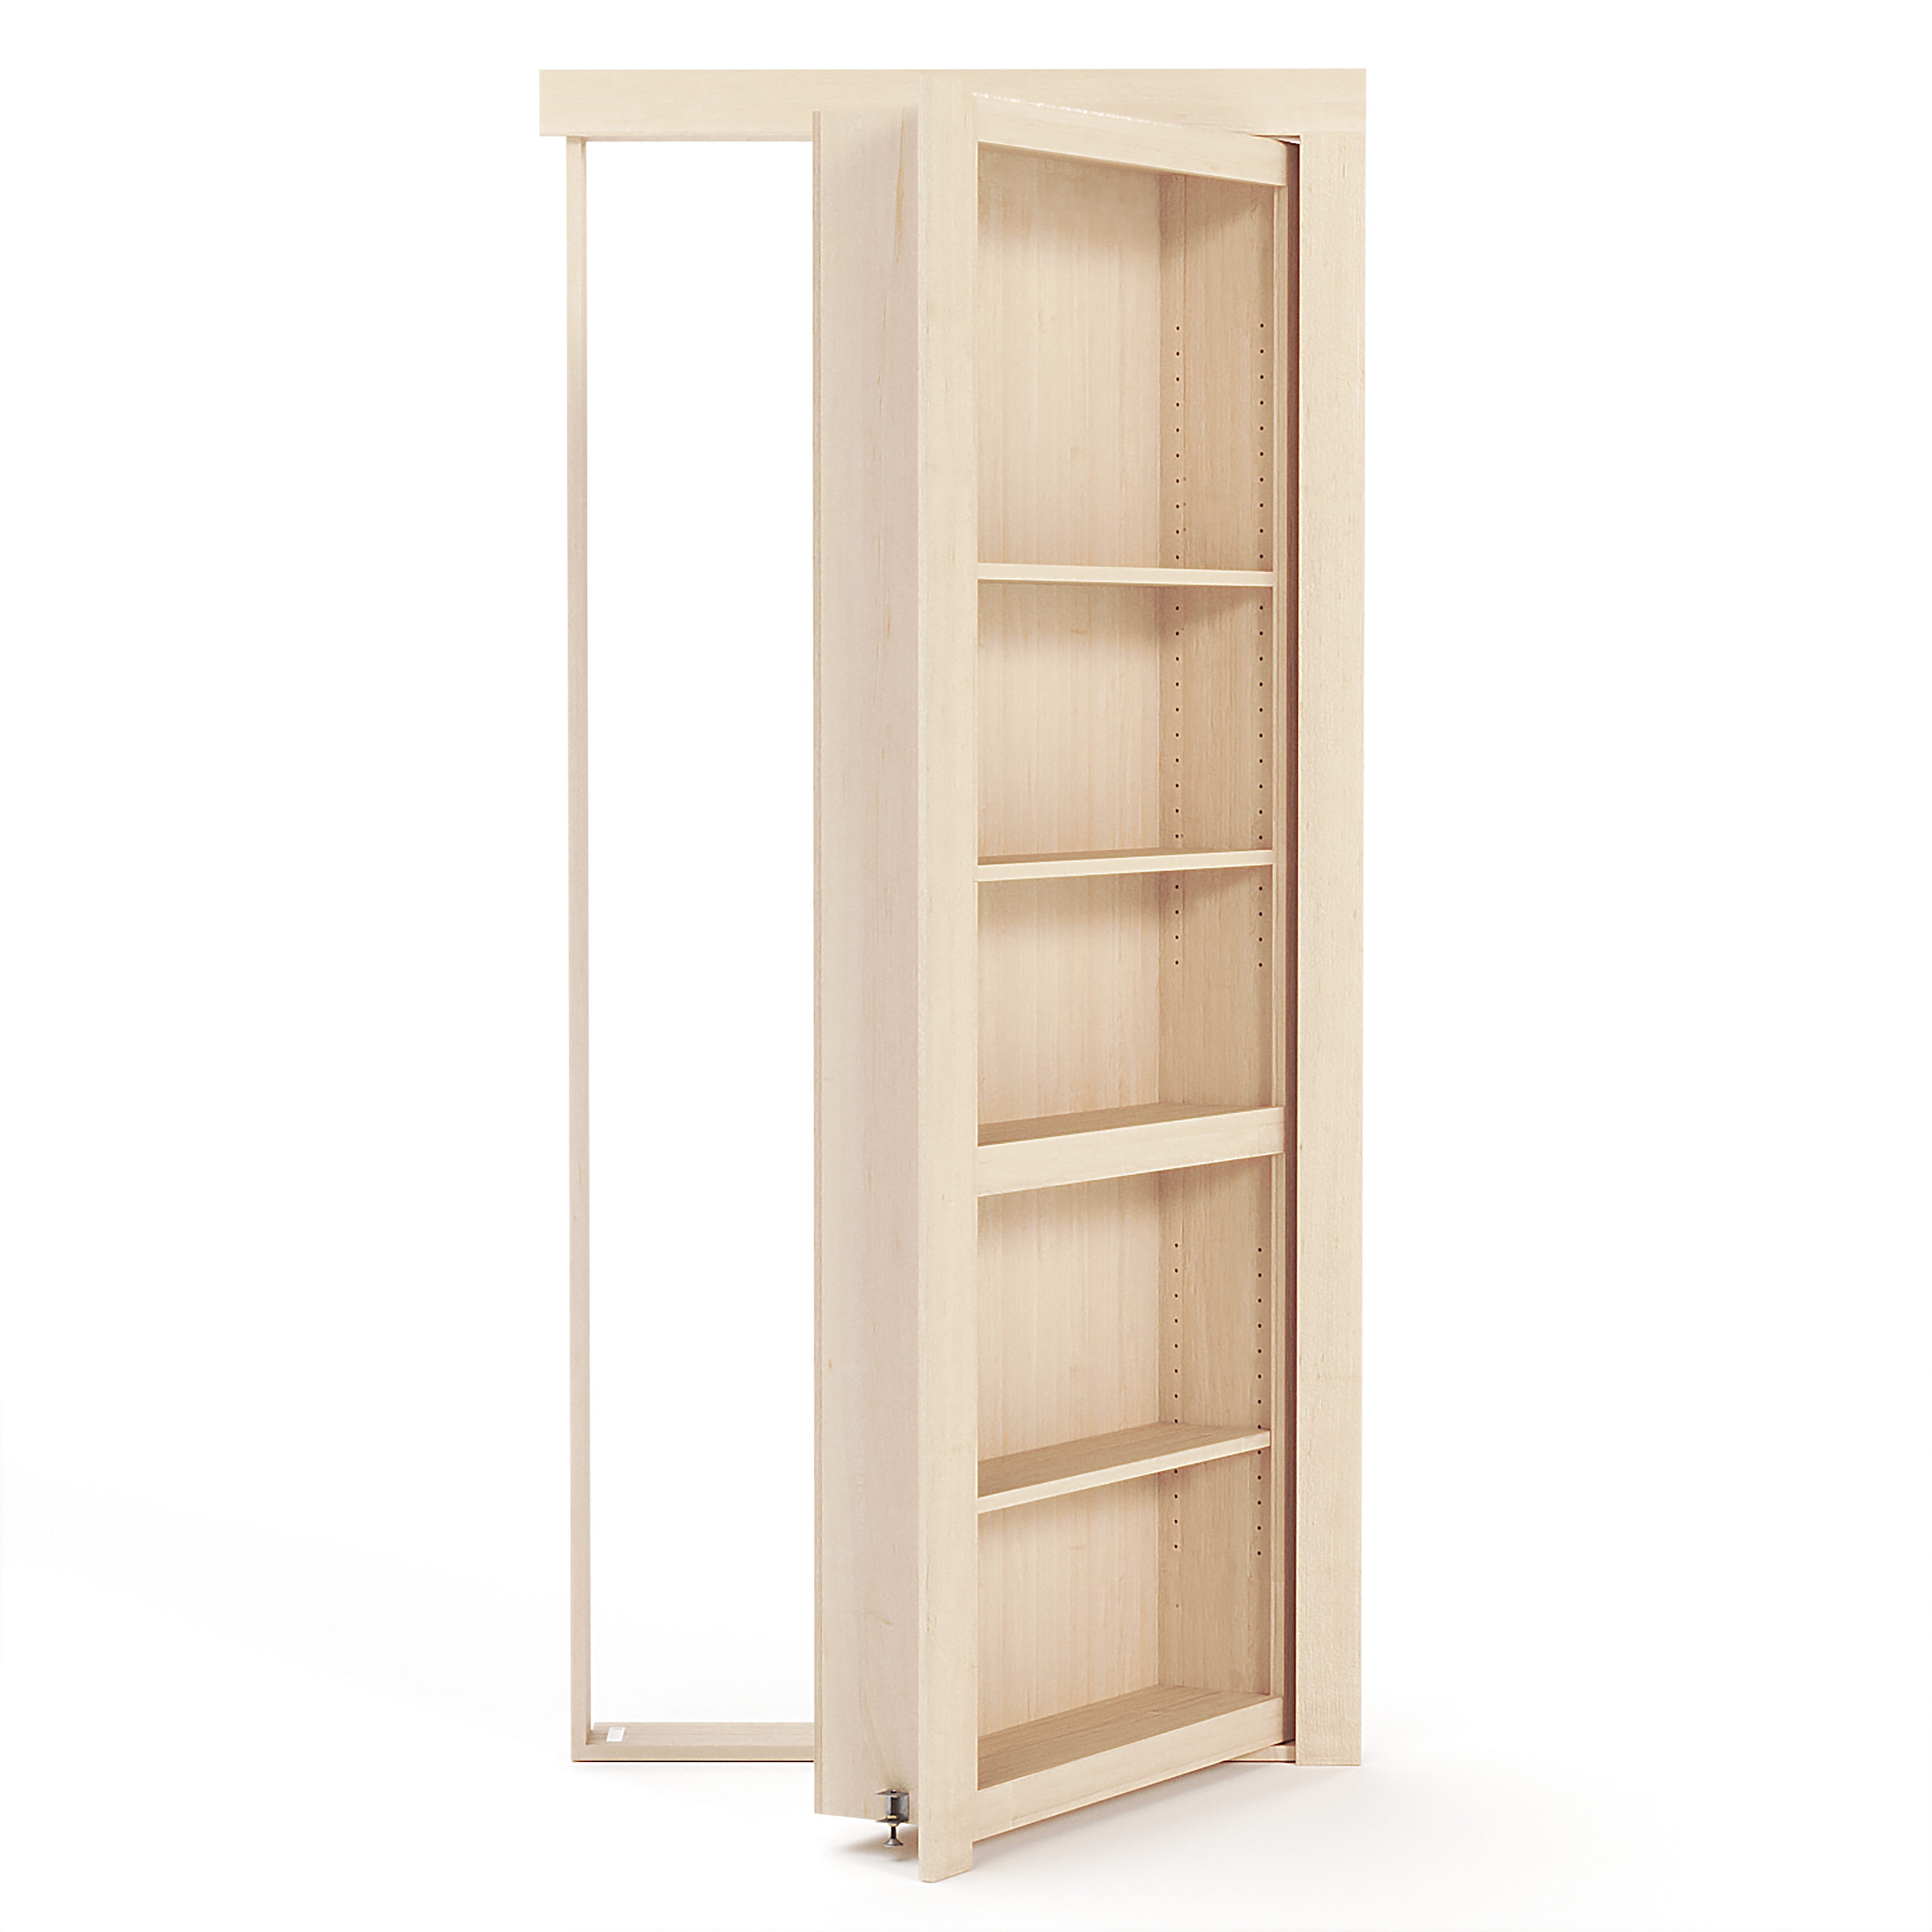 Create a Hidden Fitness Room with a Bookcase Door